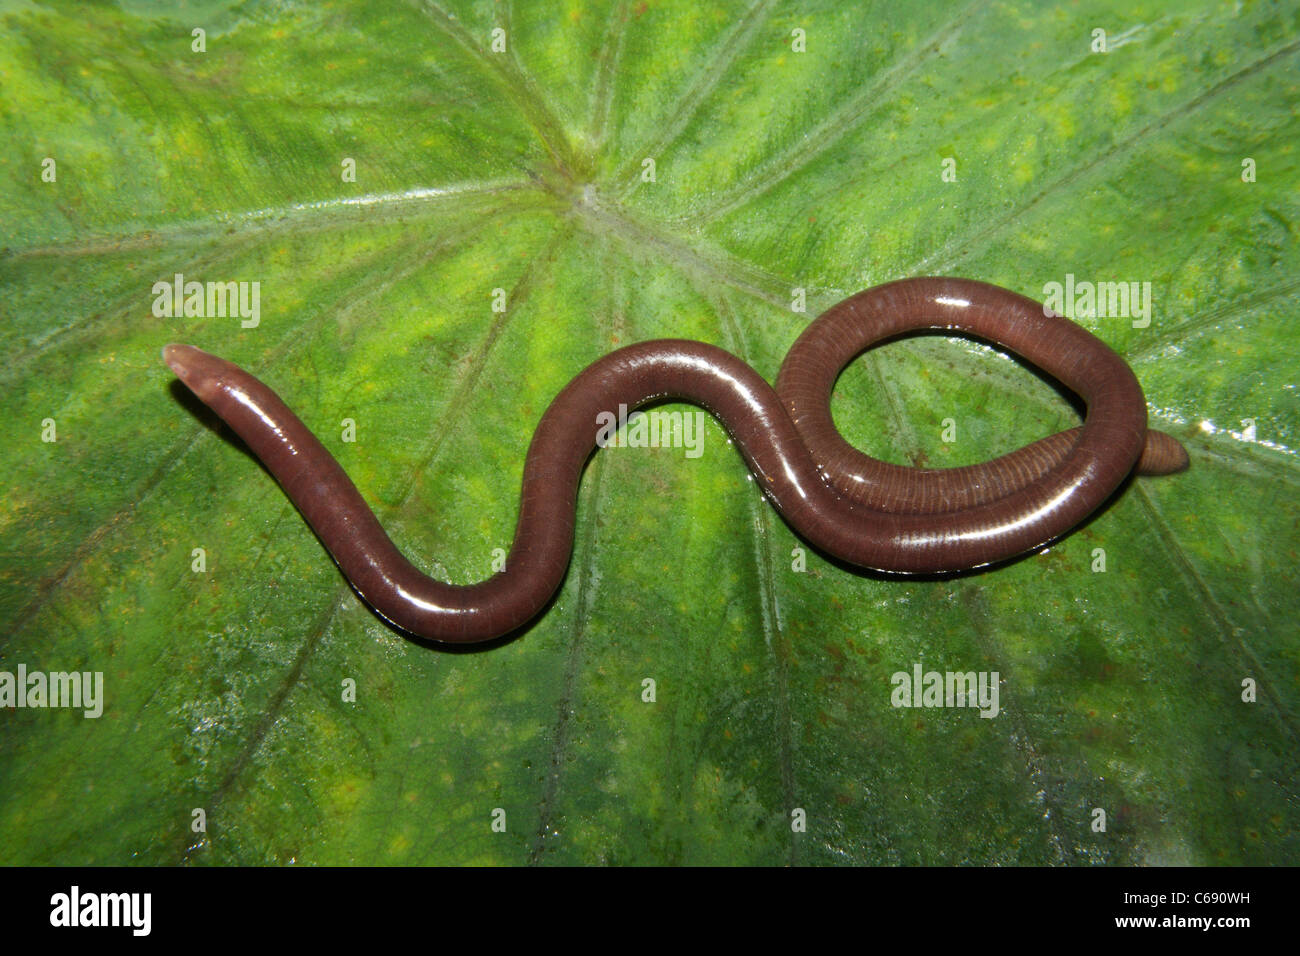 Caecilian Striped Ichthyophis Ichthyophis sp. Family: Ichthyophidae  on a leaf Stock Photo